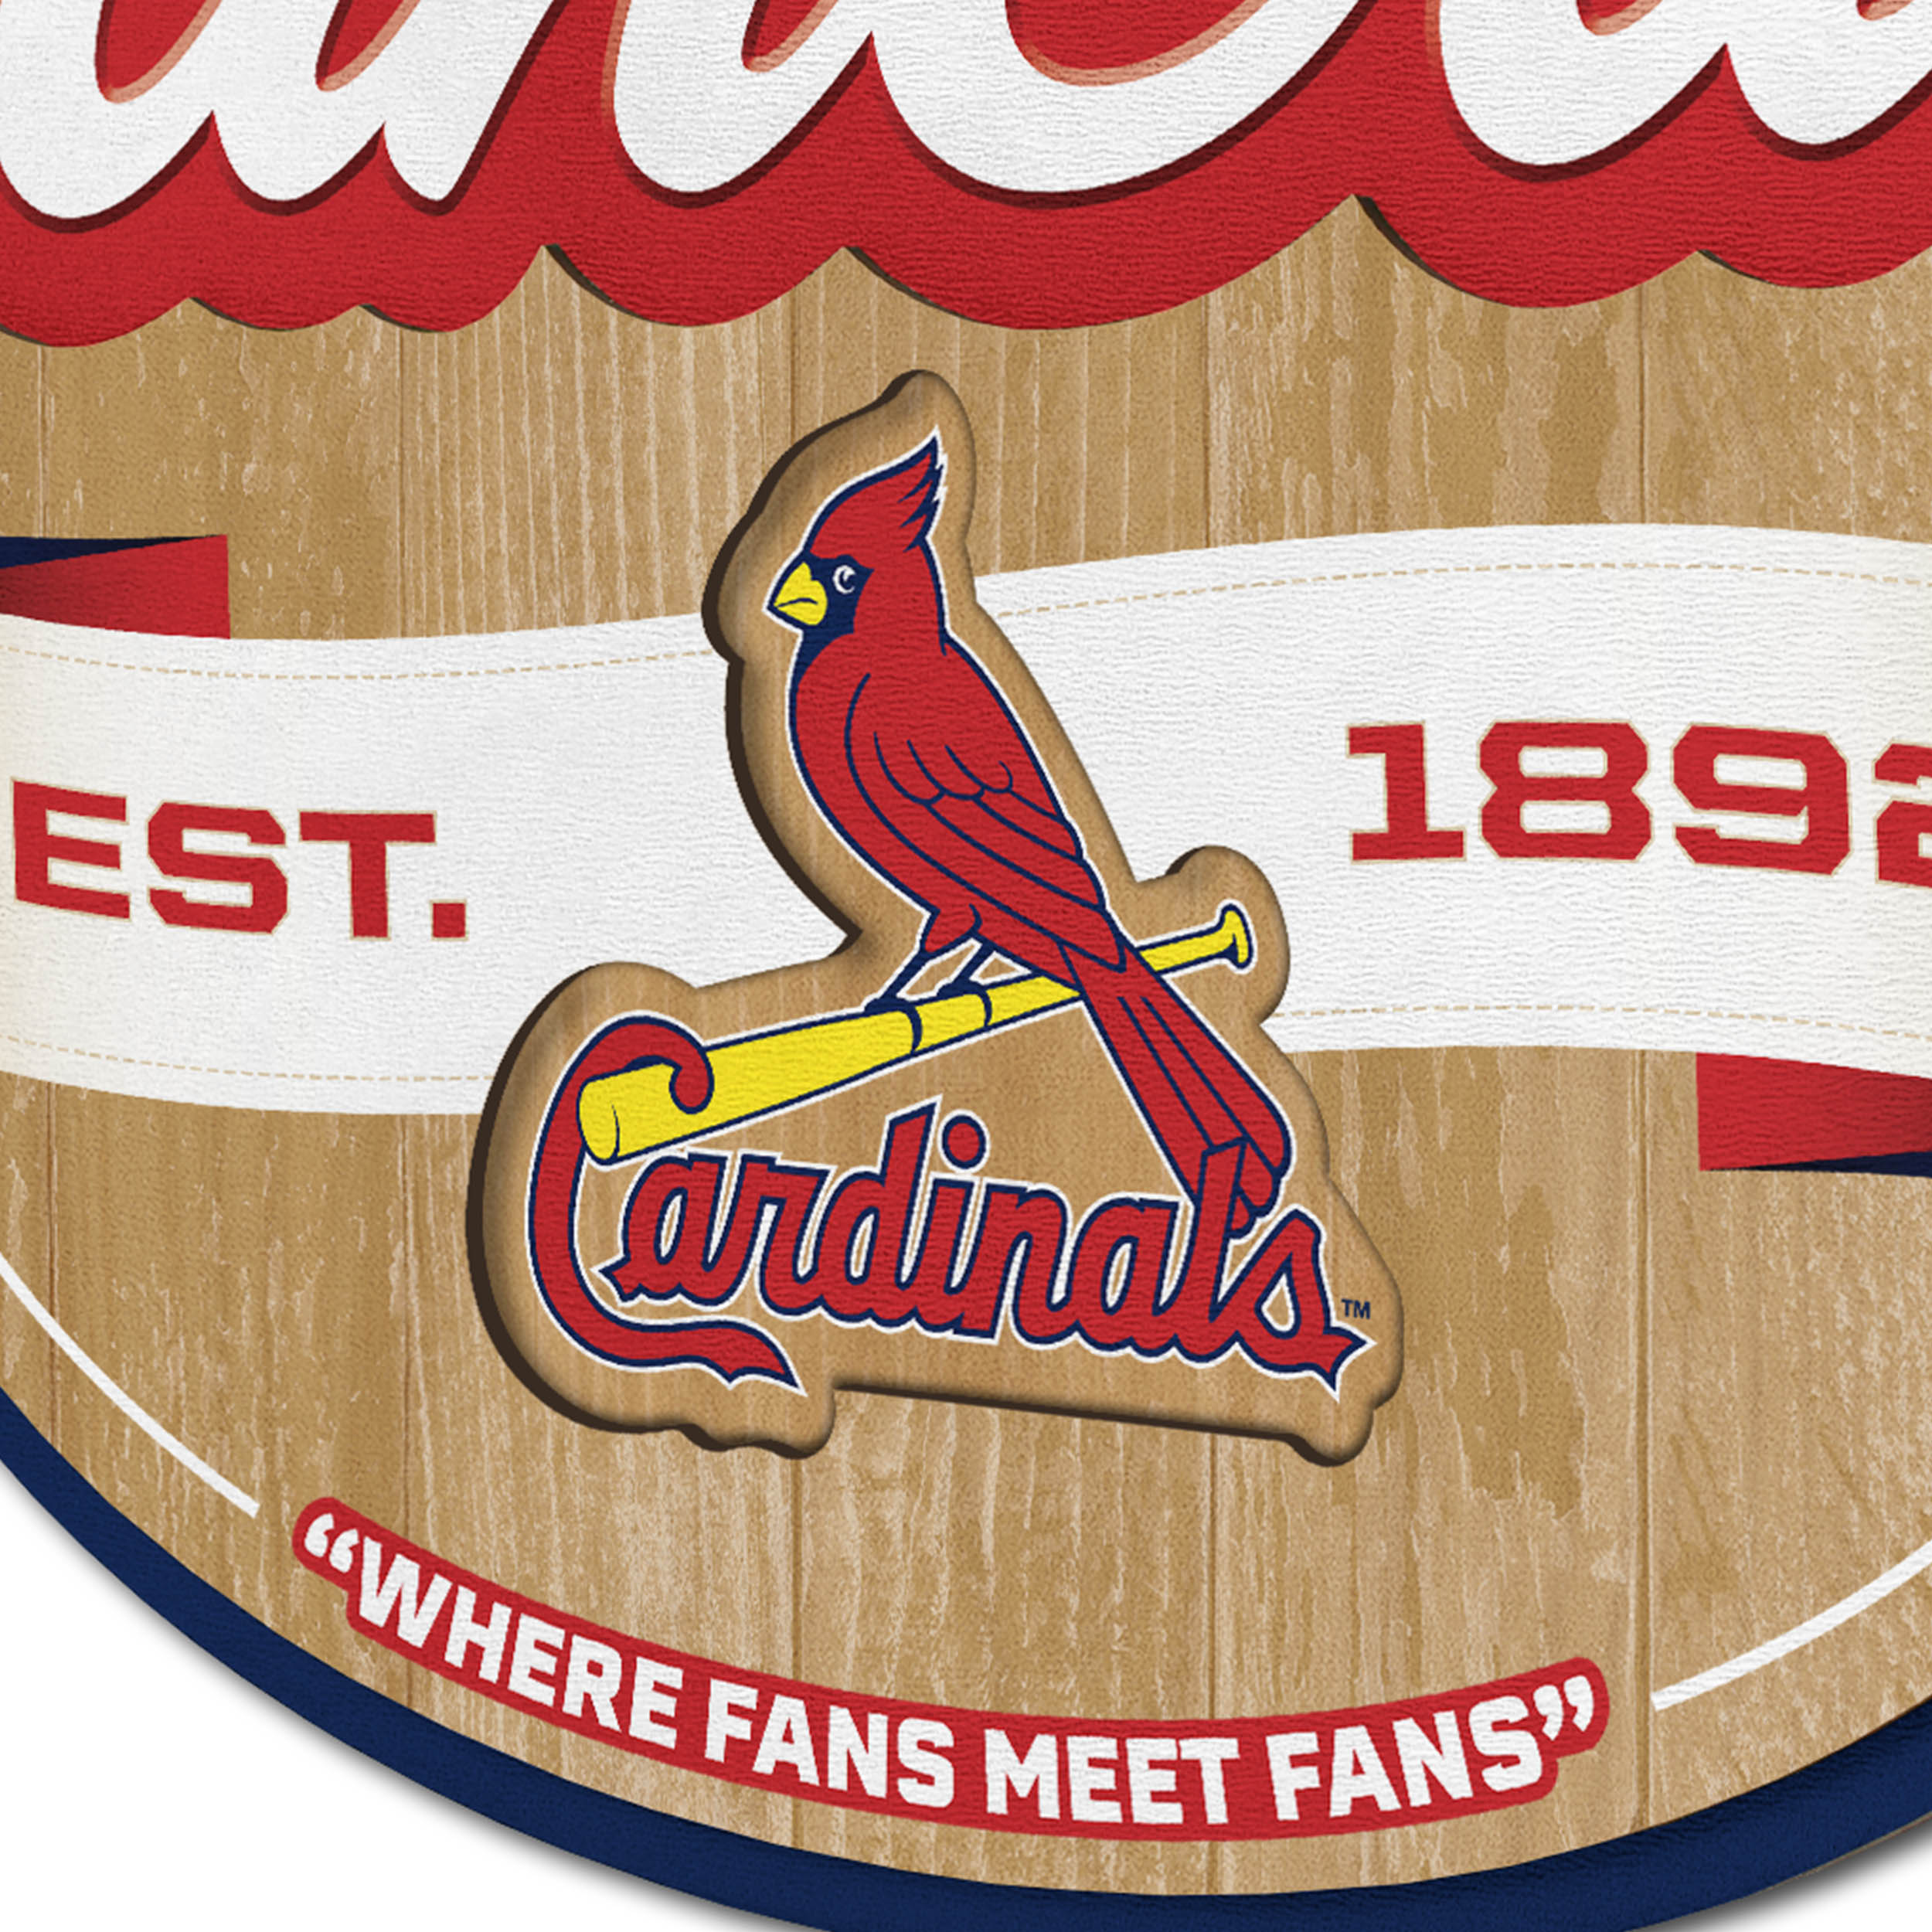 Imperial St Louis Cardinals Wrought Iron Wall Art